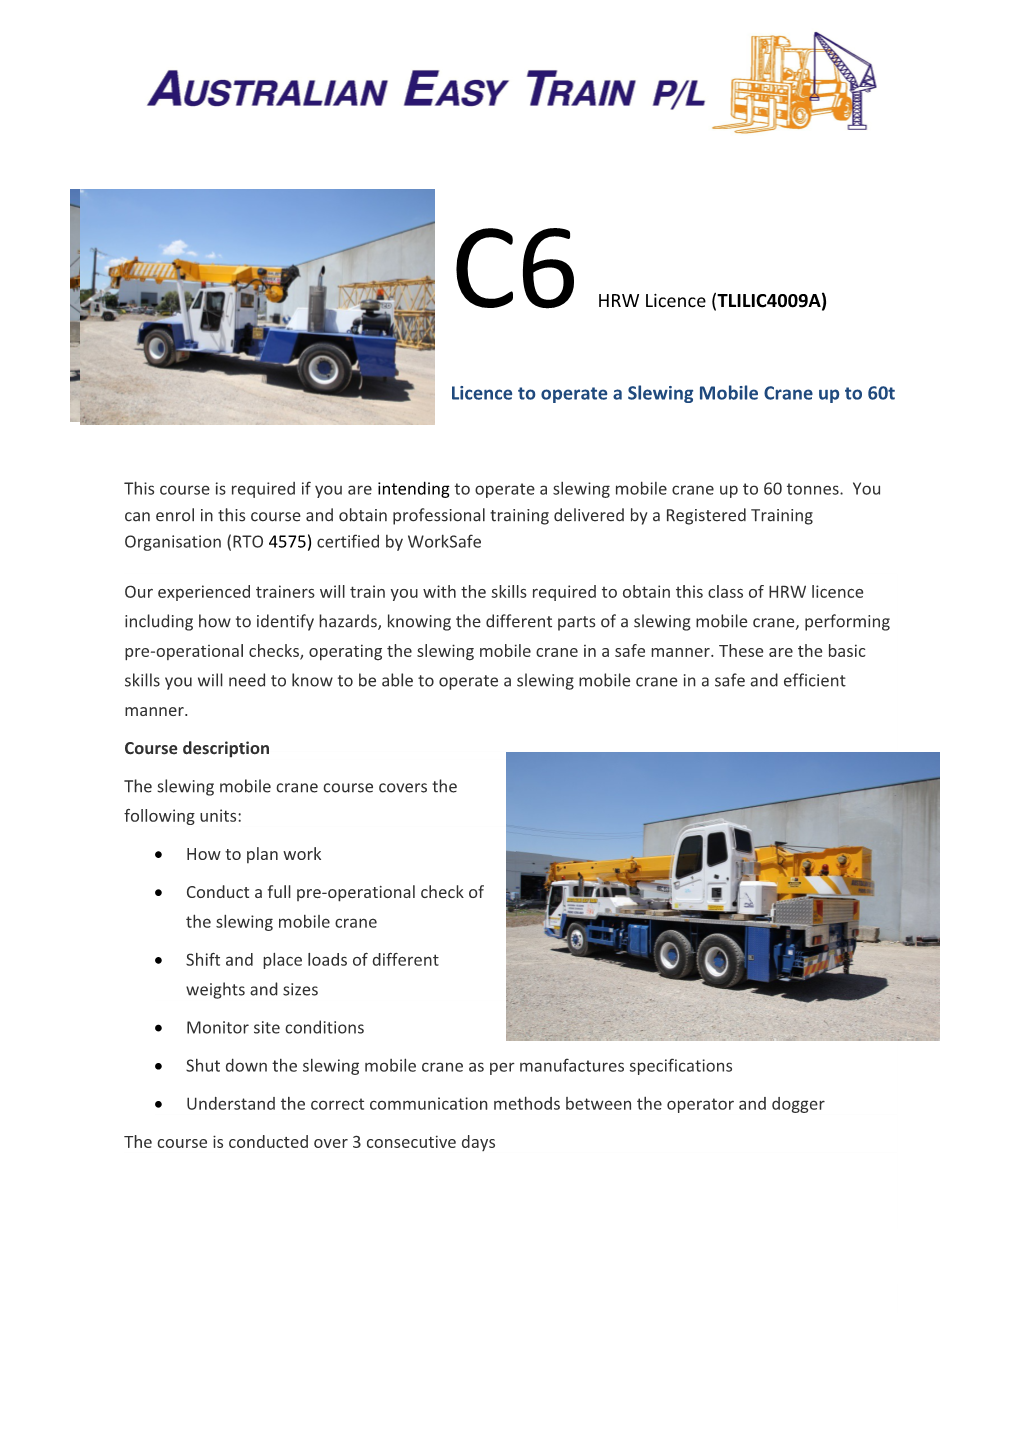 Licence to Operate a Slewing Mobile Crane up to 60T